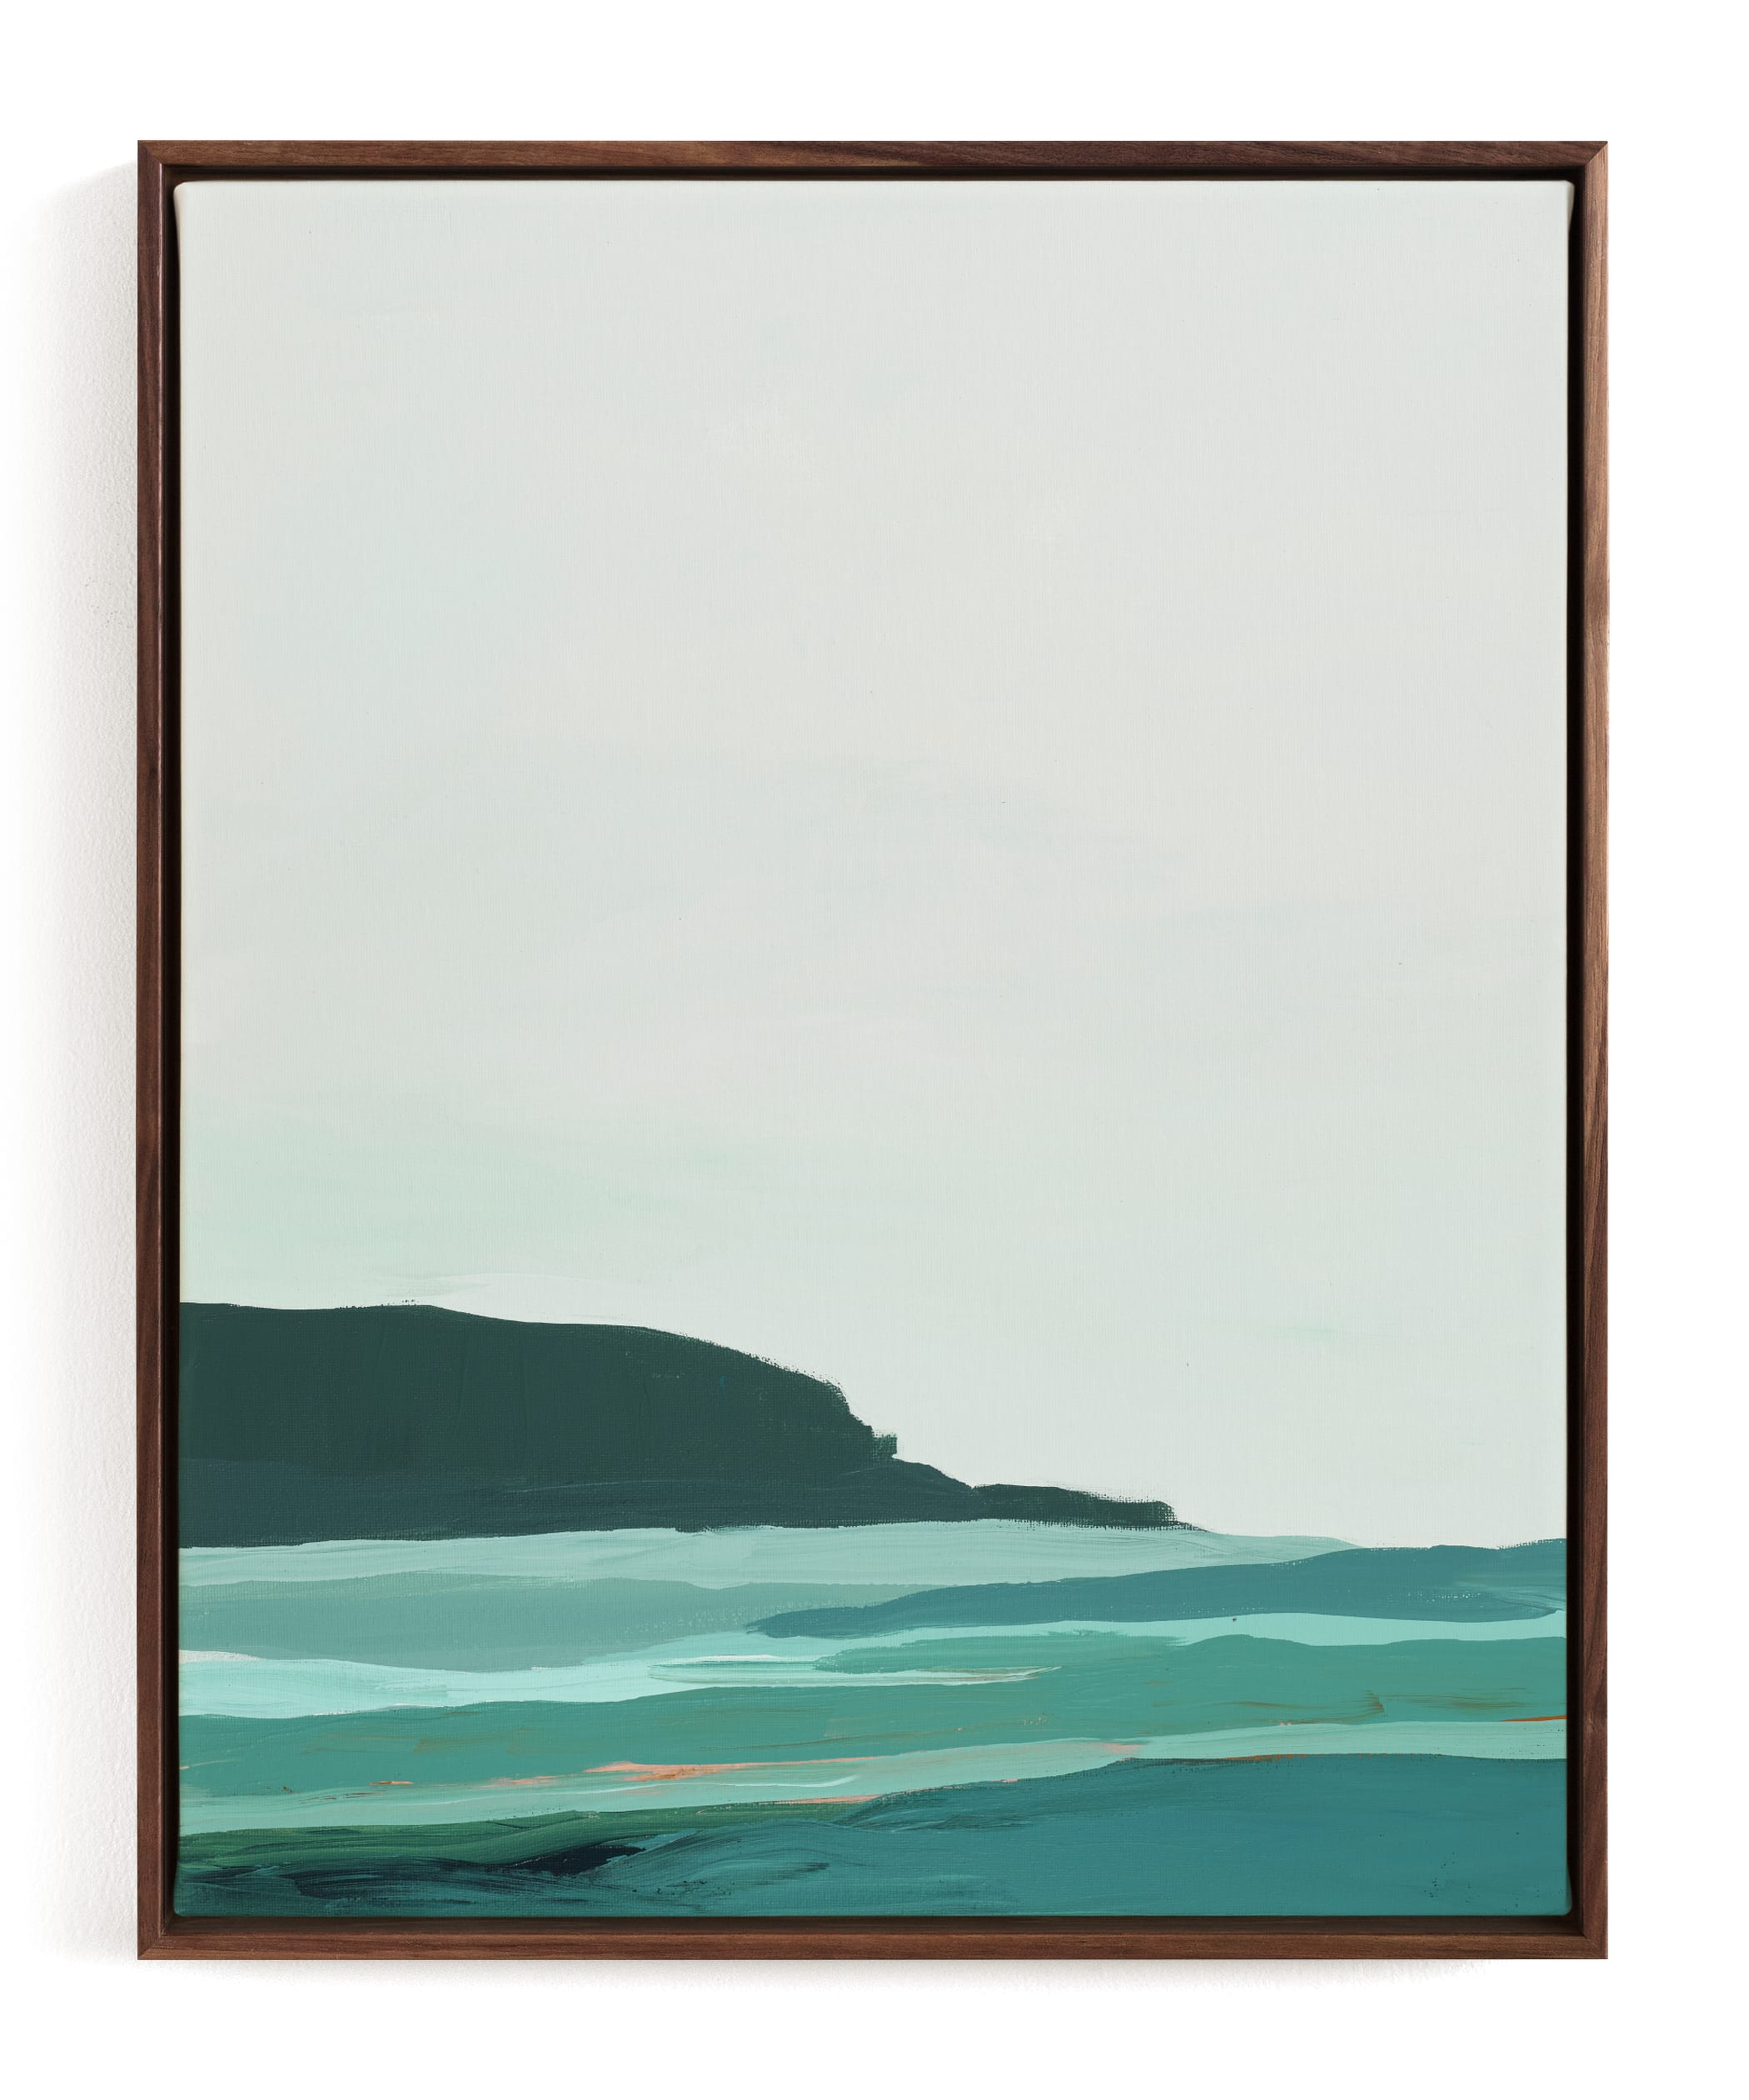 Abstract Pacific Seascape Diptych 2 Art Print - Minted